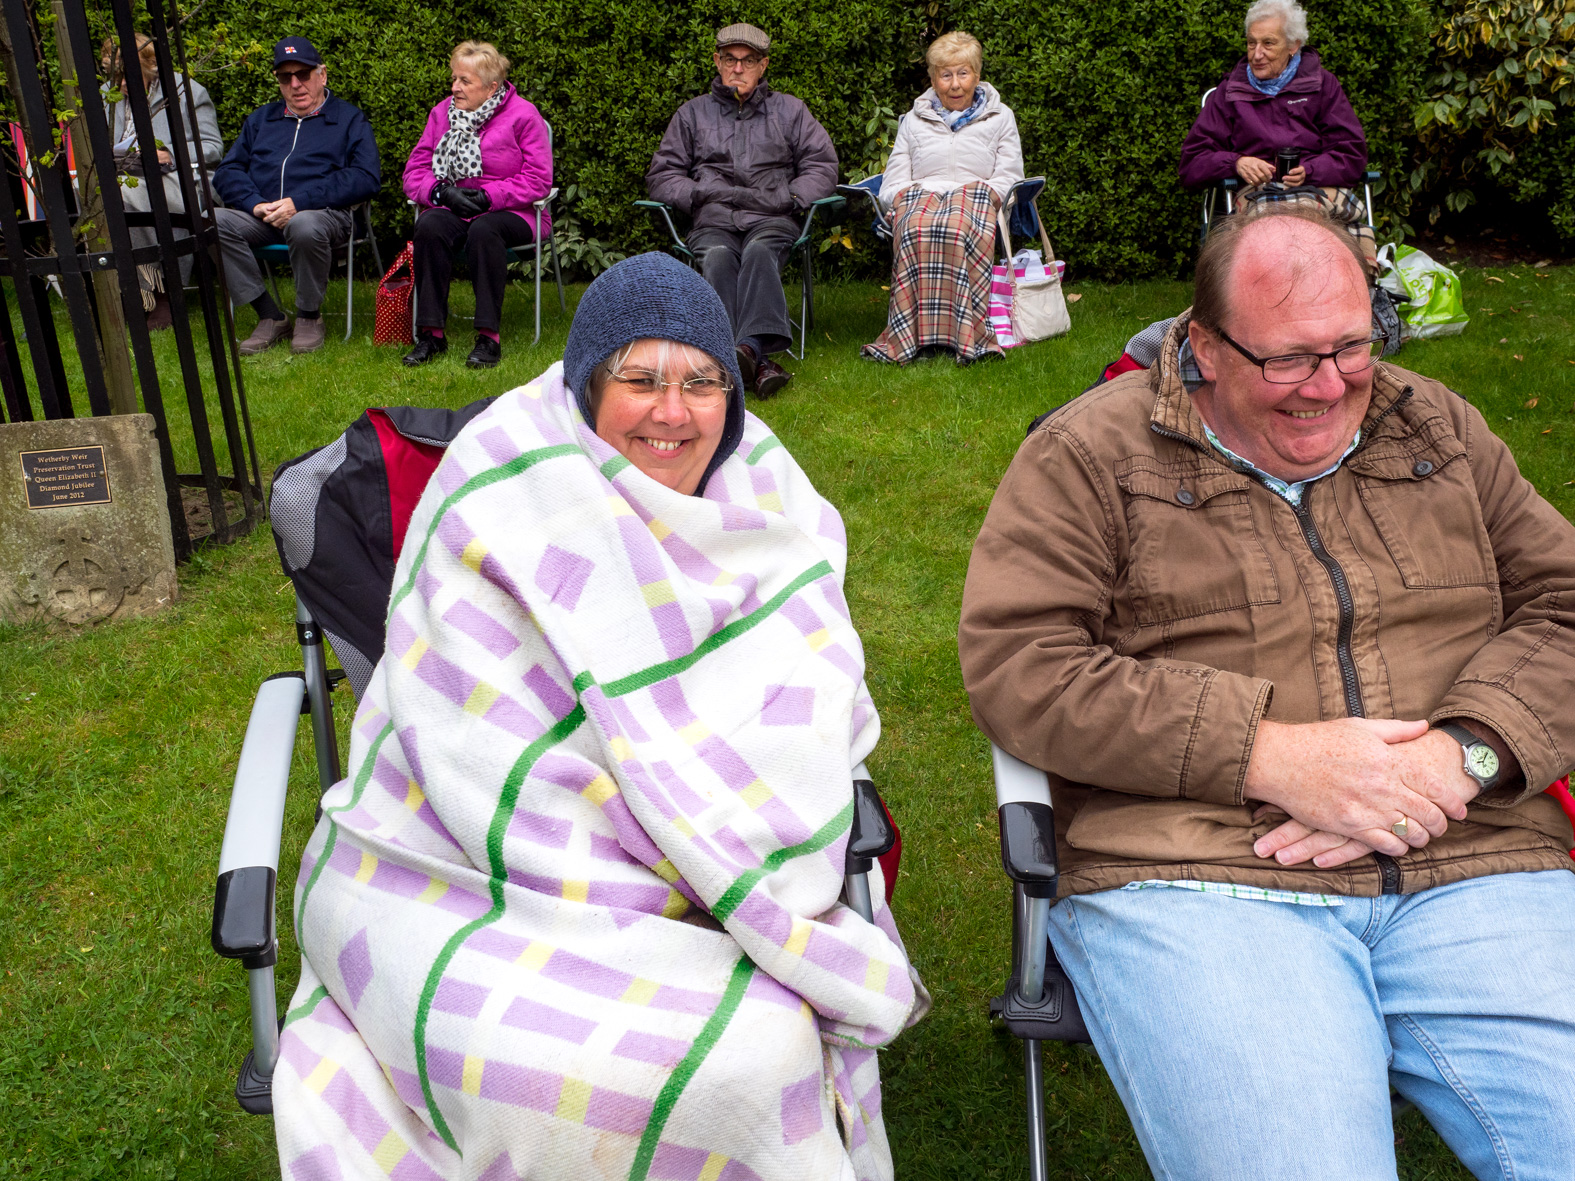 Members of the public wrap up warm while listening to an outdooe music performance. Wetherby, West Yorkshire.